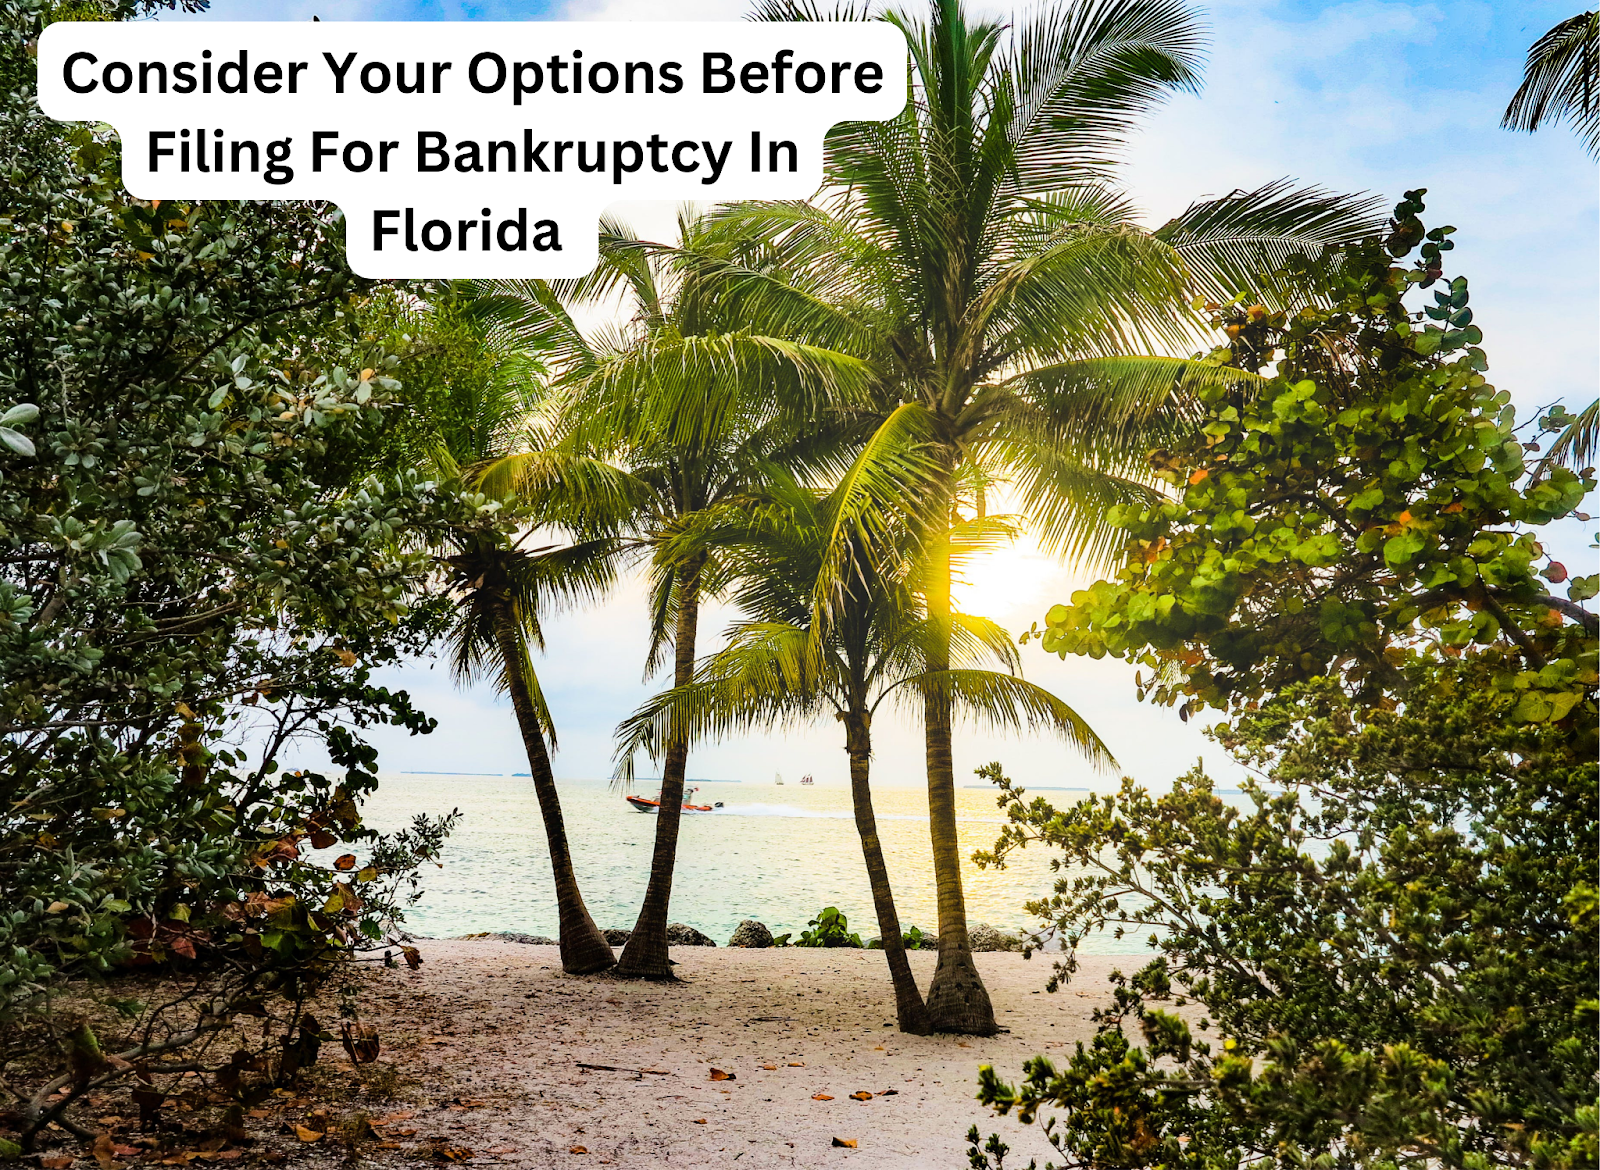 Consider Your Options Before Filing For Bankruptcy In Florida